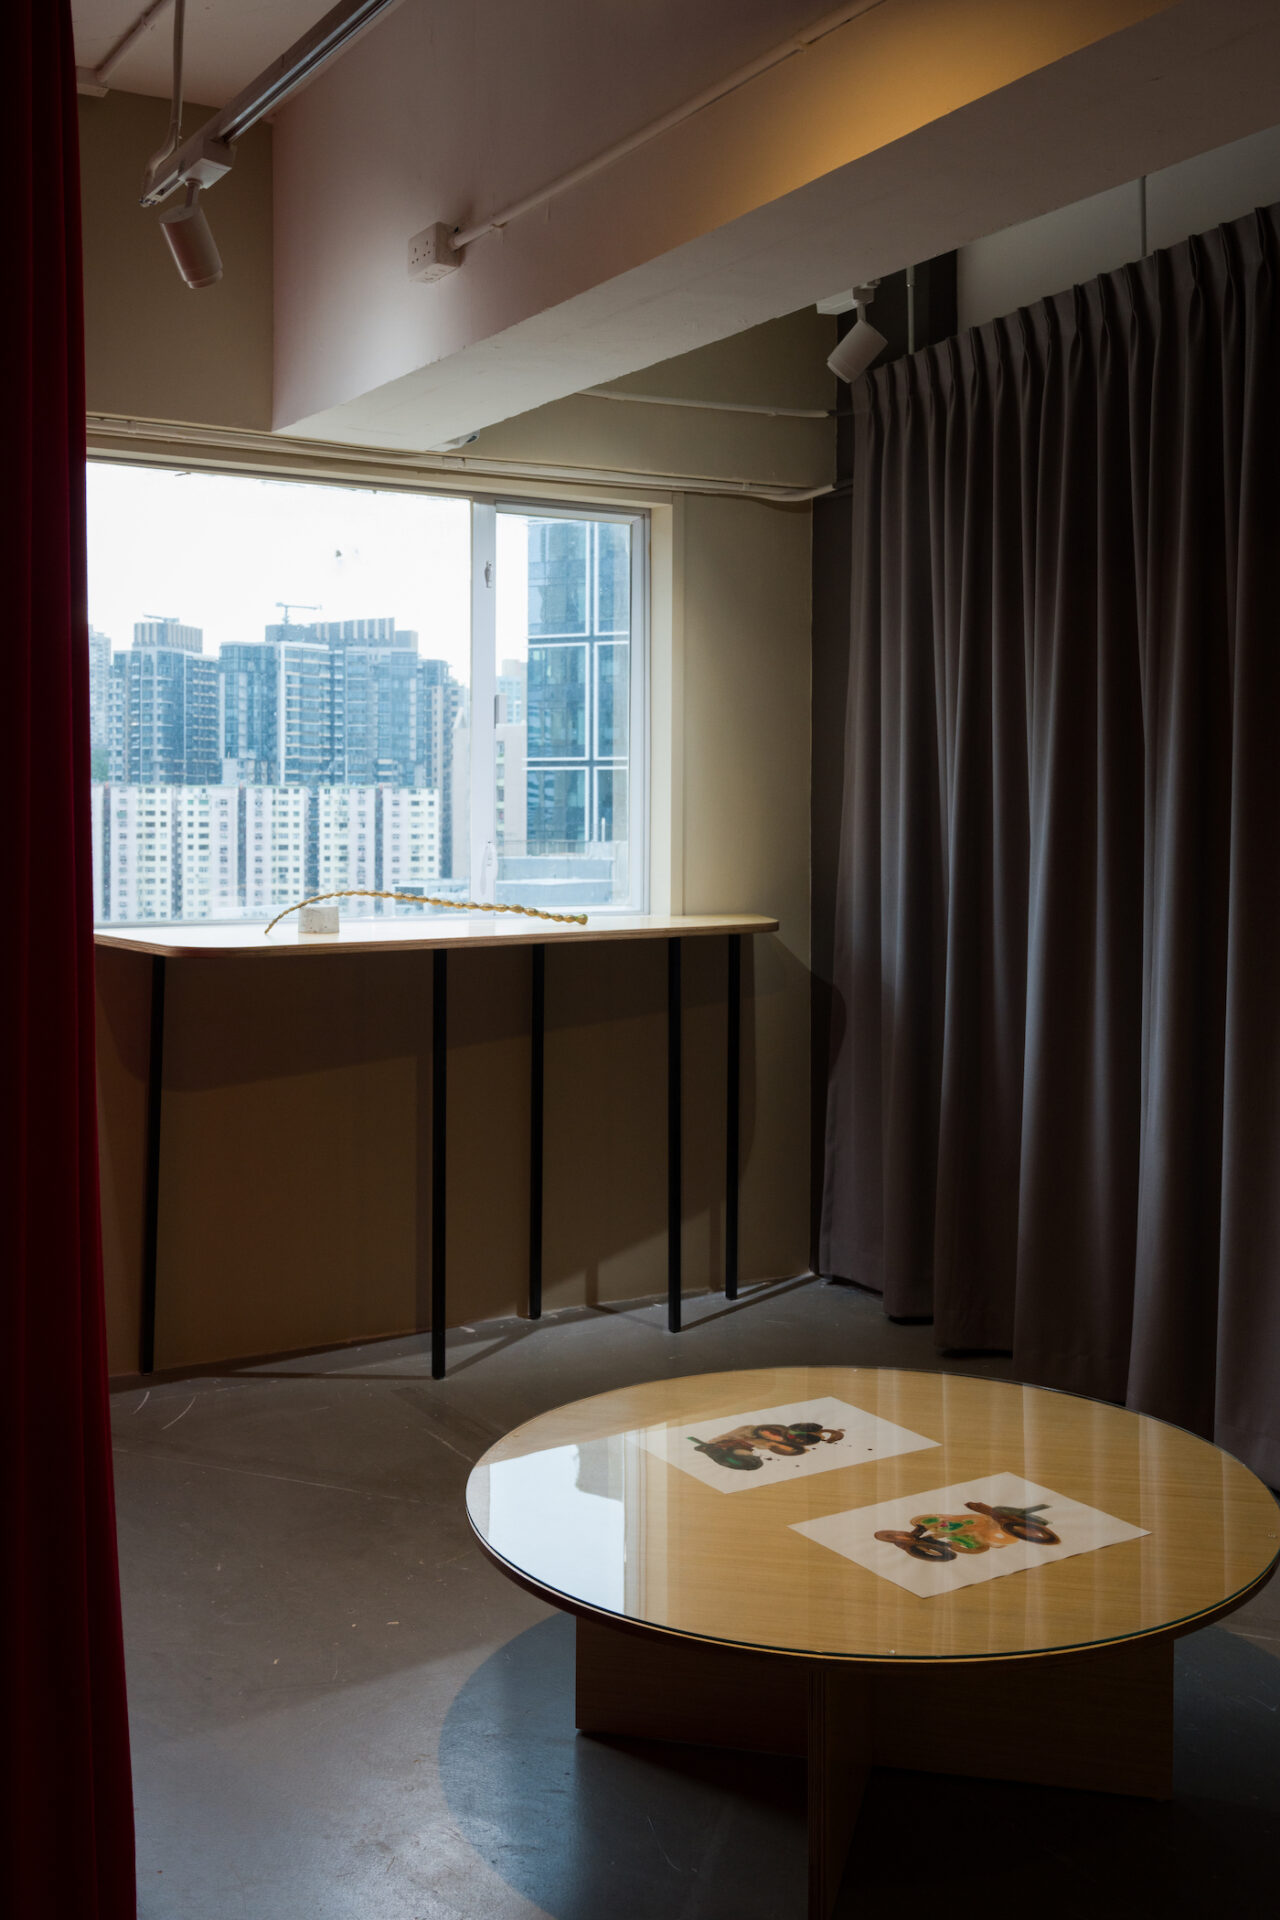 Installation View "While we are embattled" at Para Site Honk Kong, on view from 2 Oct - 20 Nov 2022. 